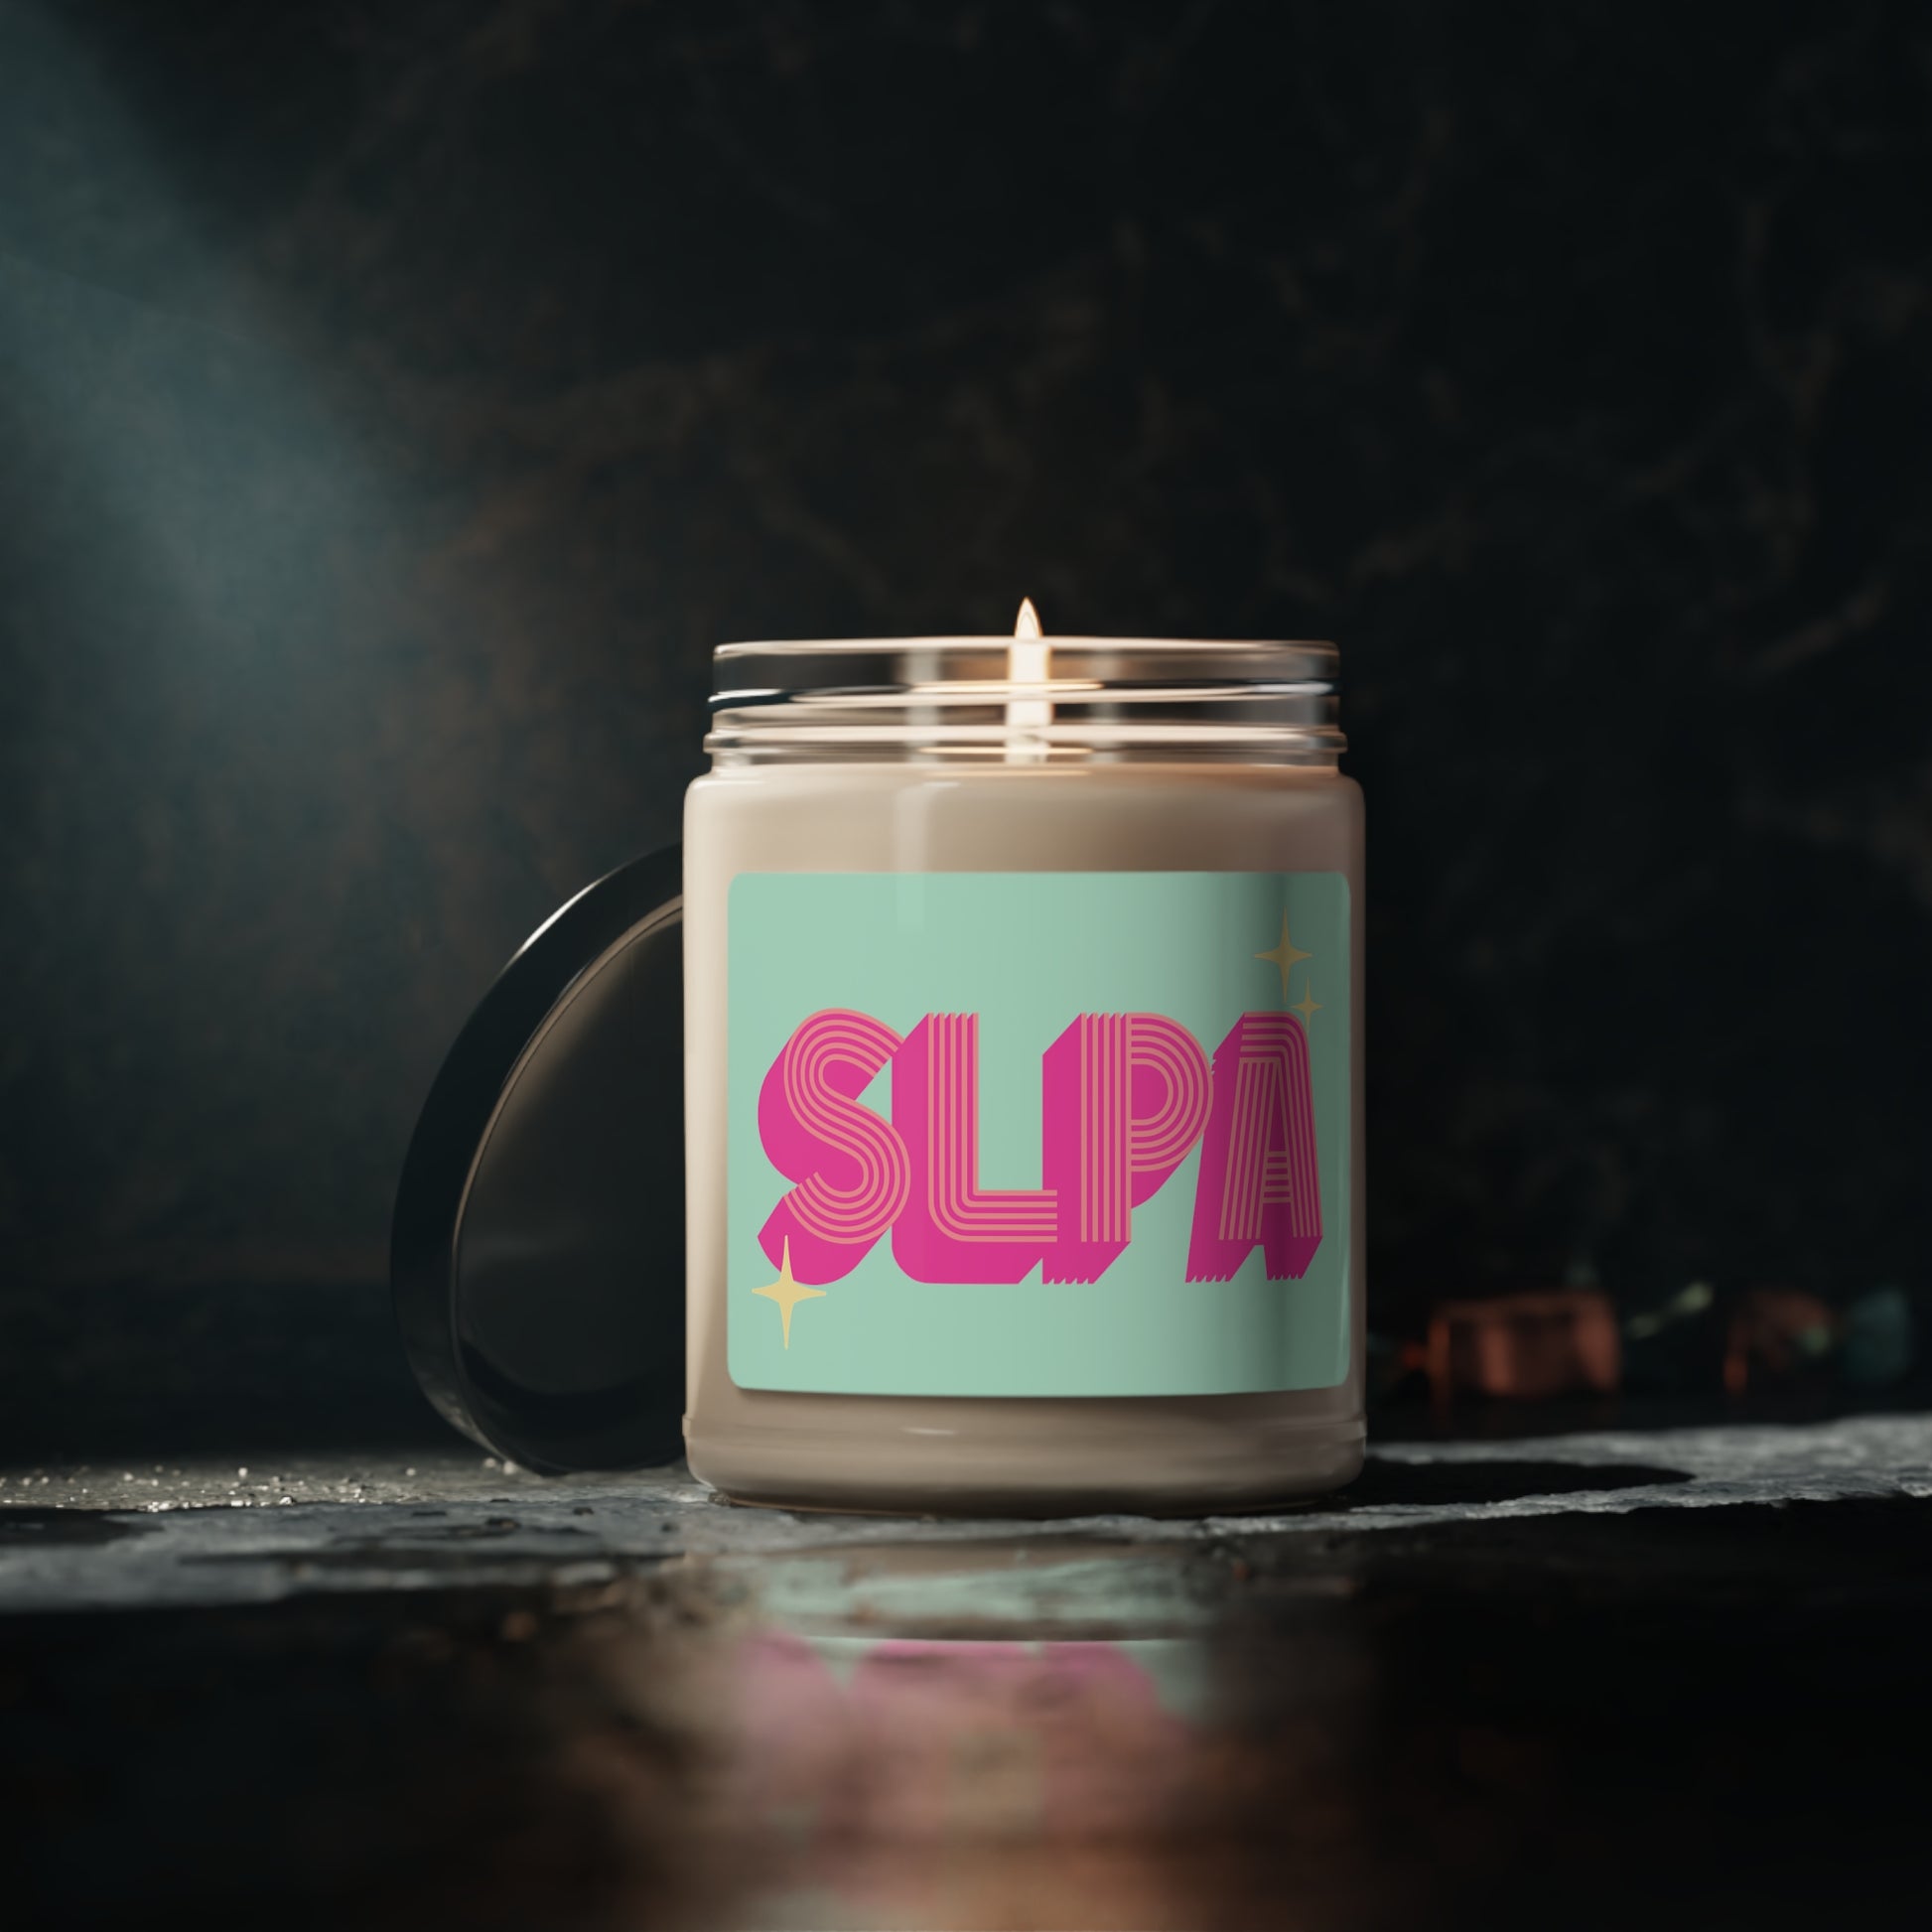 SLPA Retro Scented Soy Candle Gift, 9 oz